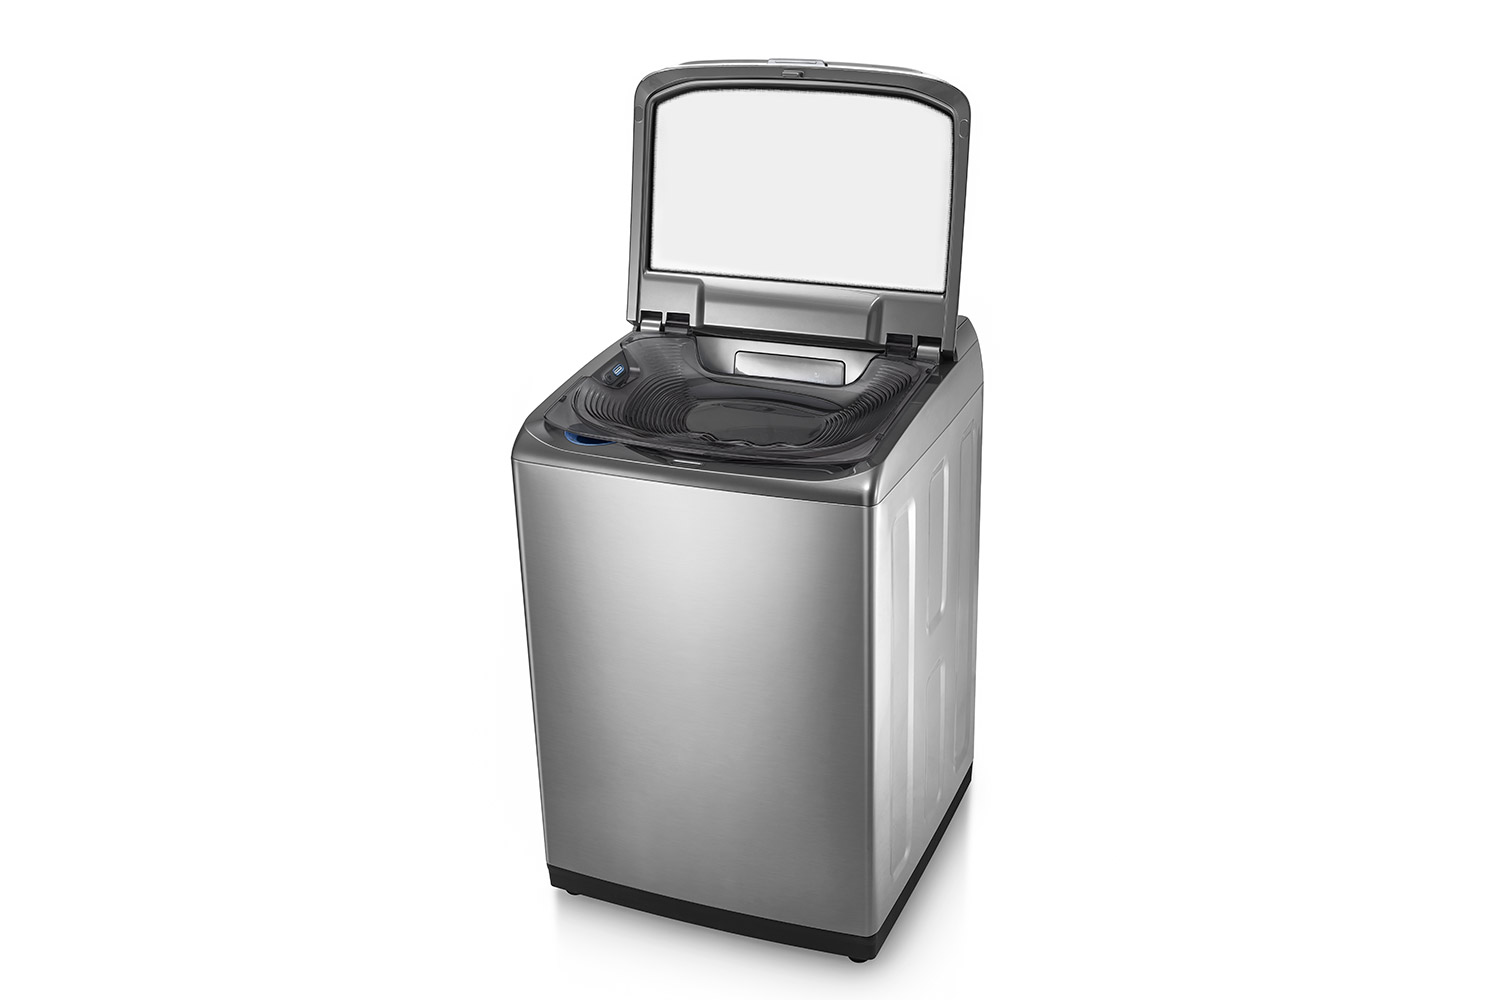 Samsung Top Load Washer with Mid Control